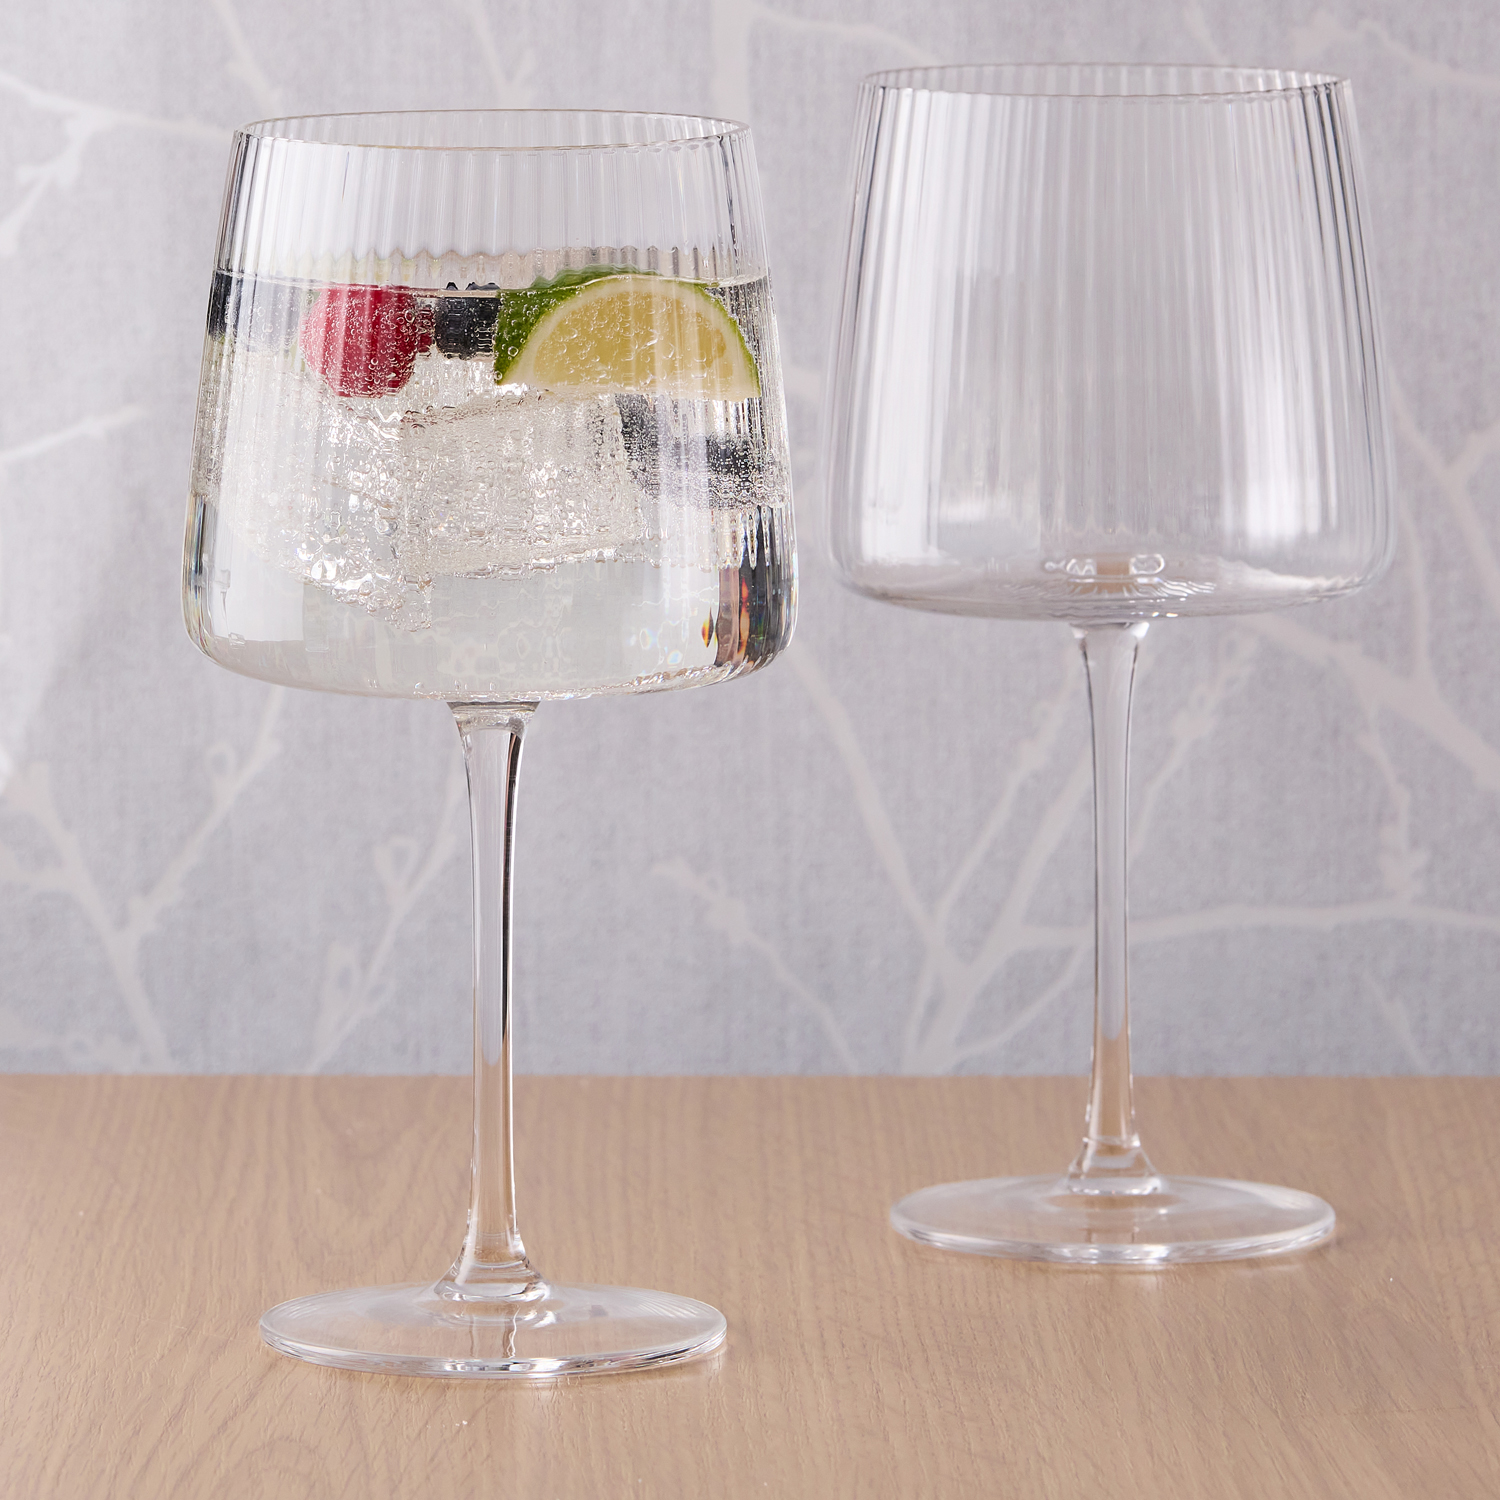 dimple Set of 2 Rich White Wine Glasses